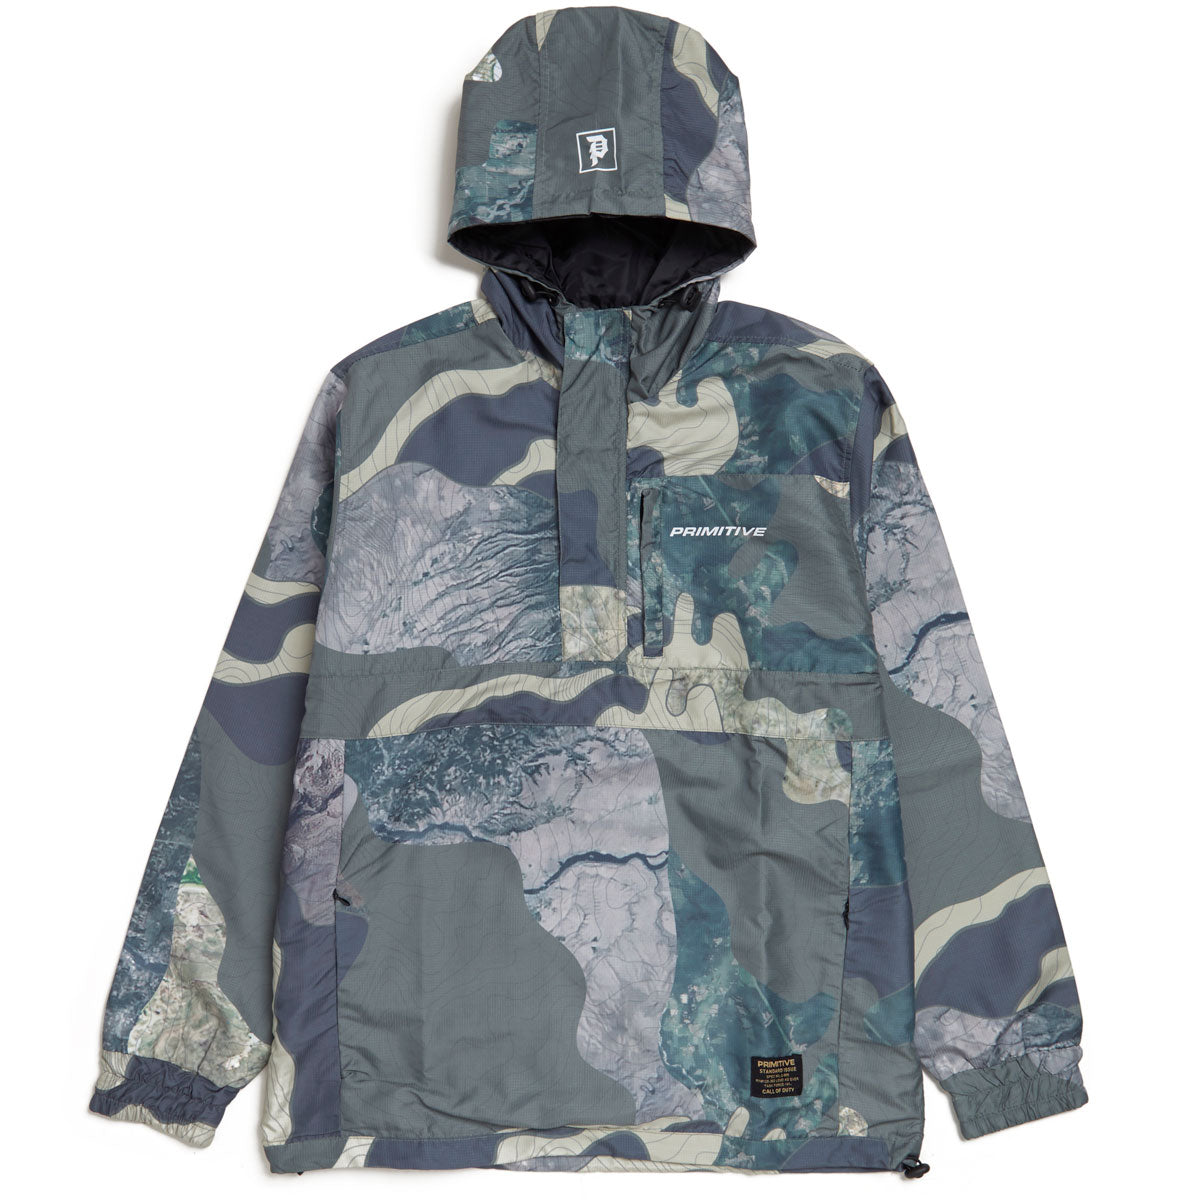 Primitive x Call Of Duty Mapping Anroak Jacket - Olive image 1